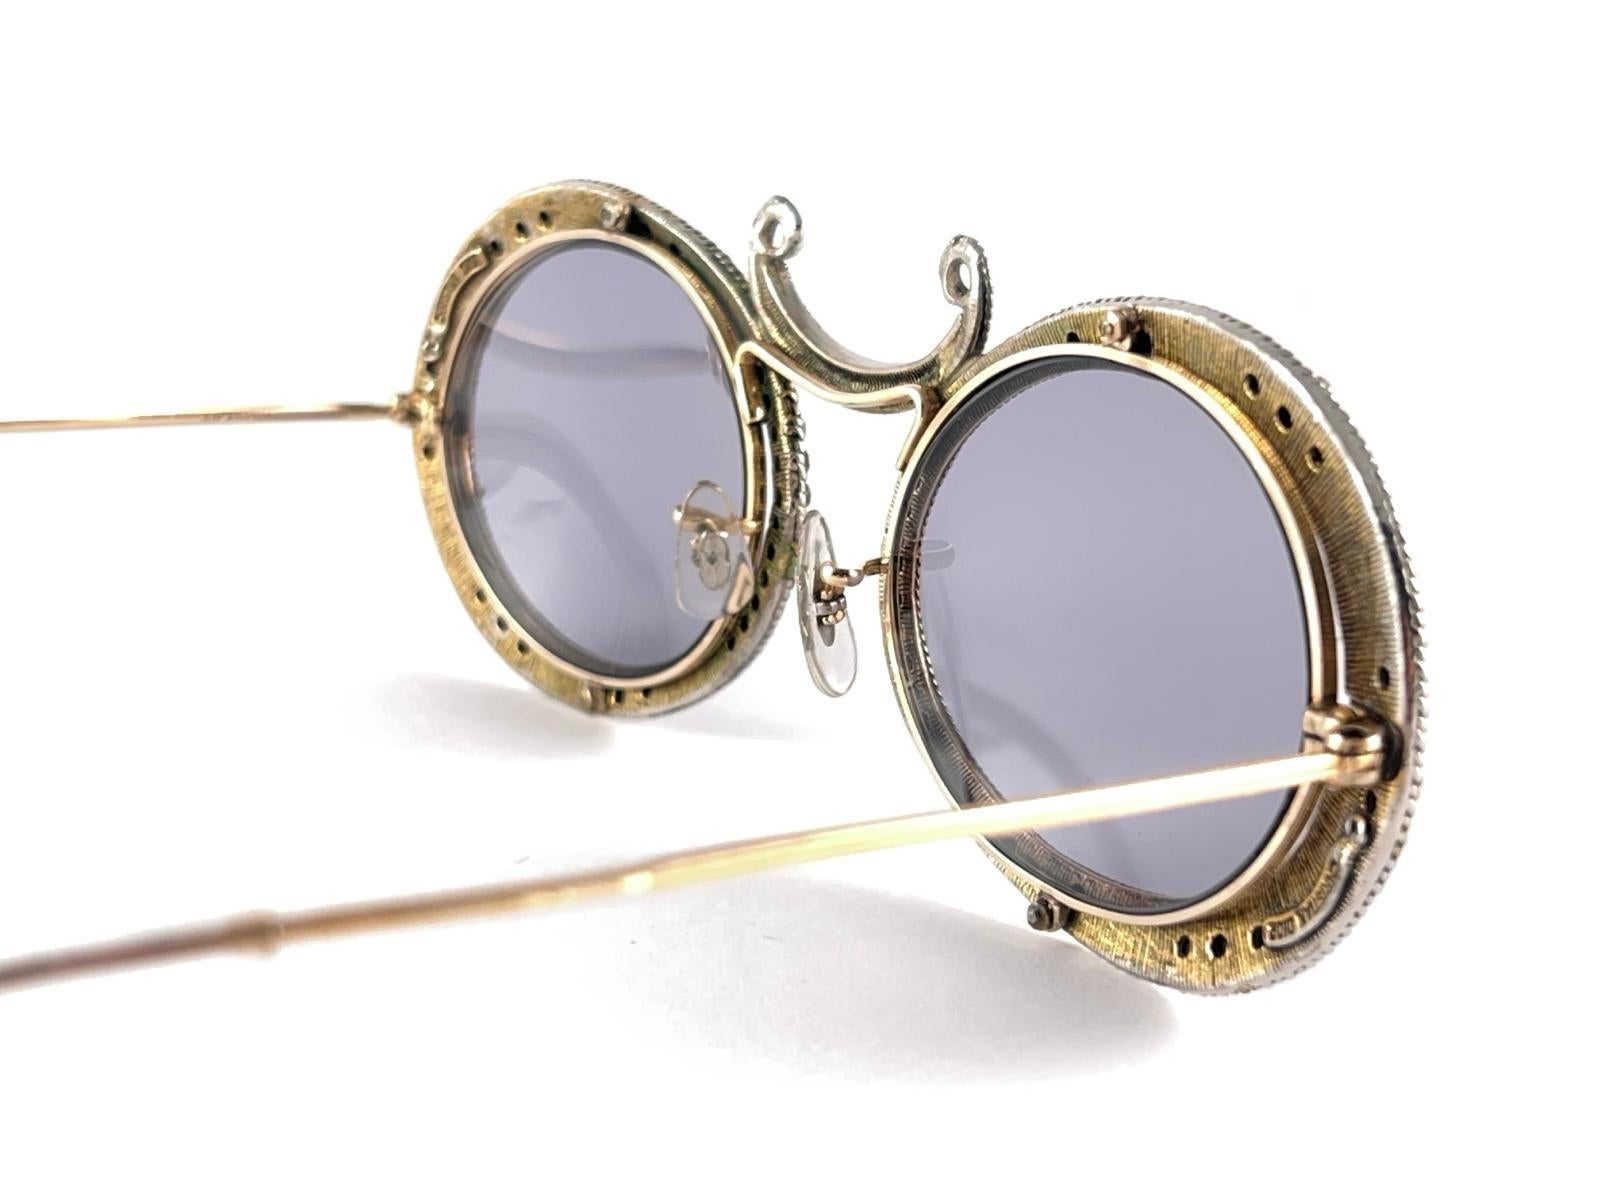 Ultra Rare 1960 Christian Dior Enamel Jewelled by Tura Collector Item Sunglasses For Sale 2